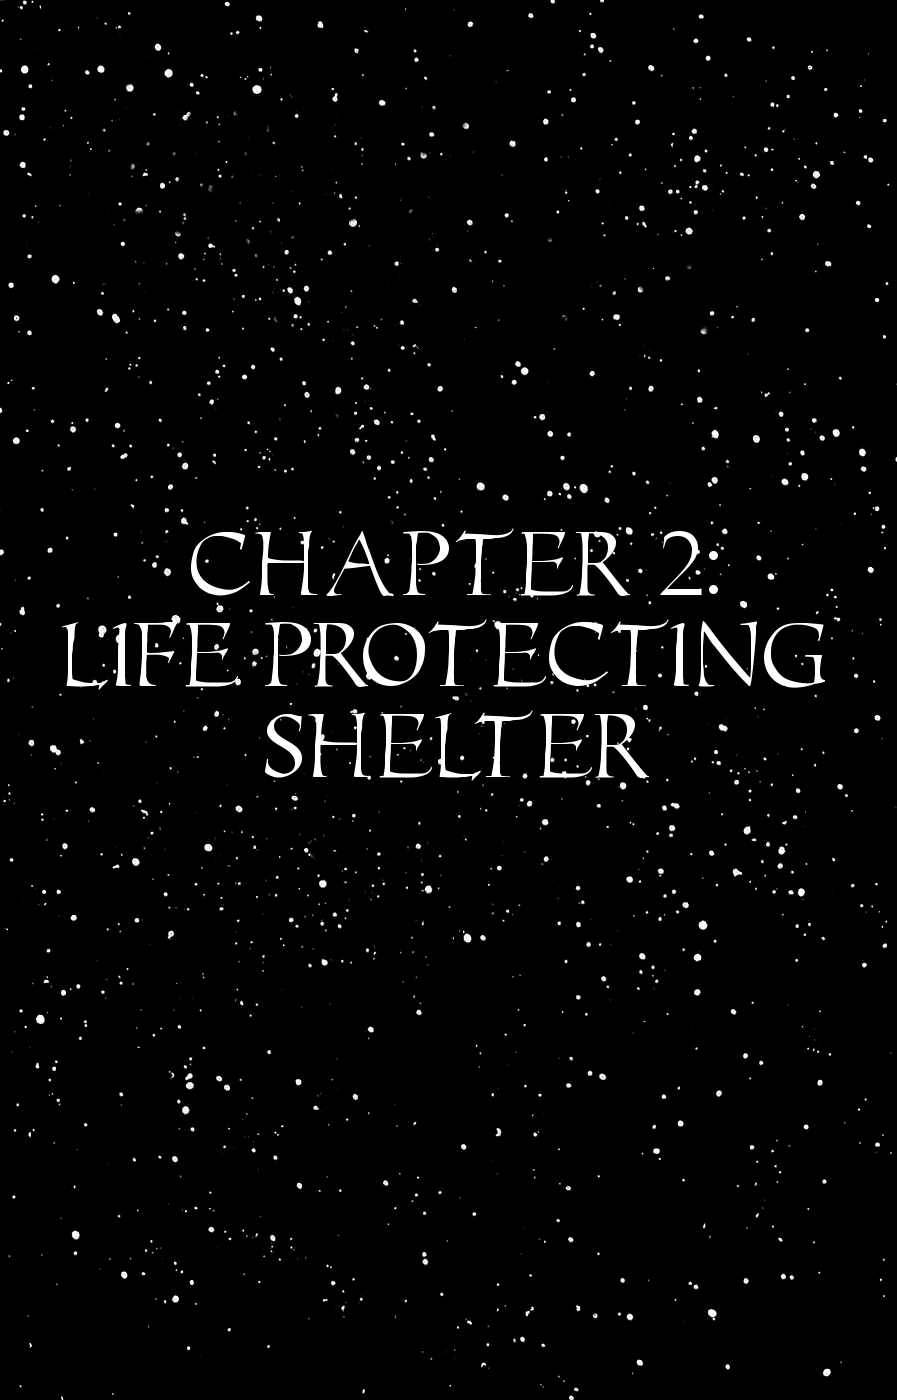 Silent Knight Sho Vol. 1 Ch. 2 Life Protecting Shelter